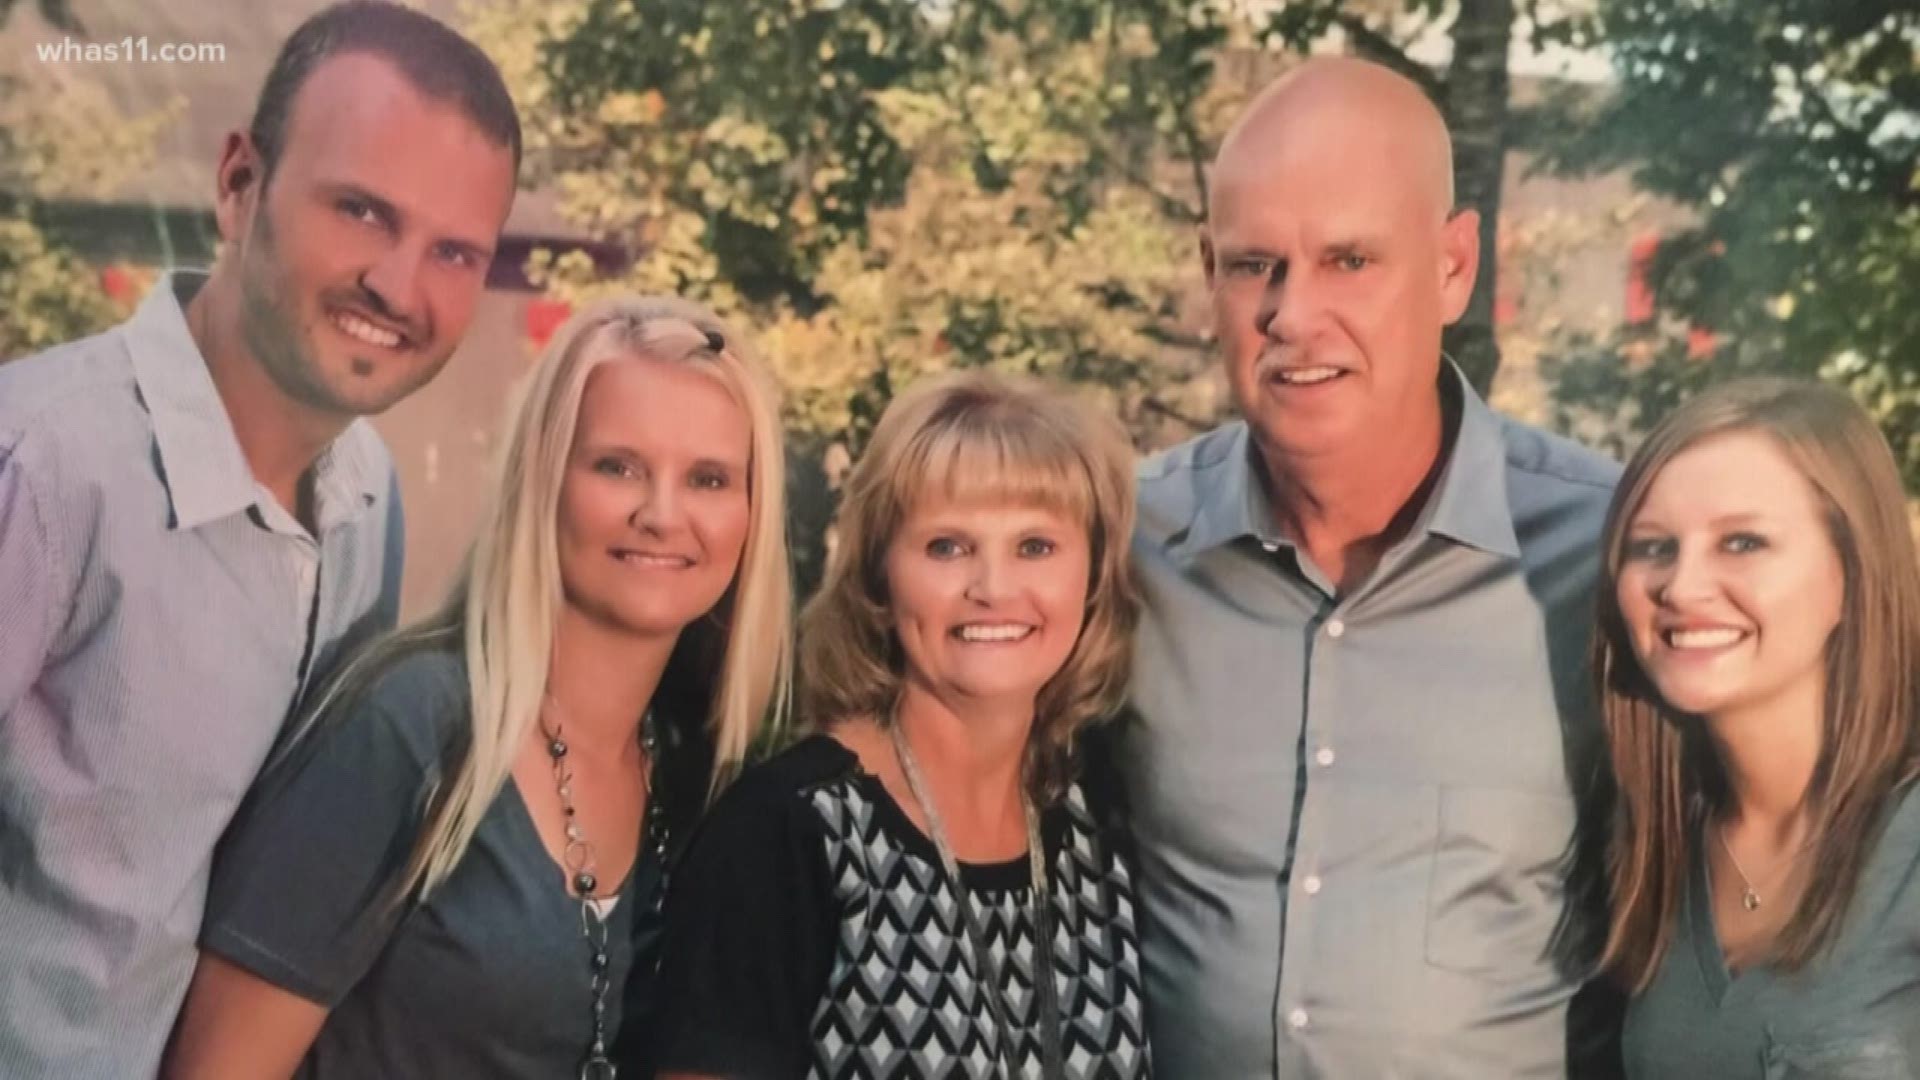 The disappearance of Bardstown's Crystal Rogers and the death of her father, Tommy Ballard, are spotlighted in two national television series on Oxygen and Investigation Discovery.